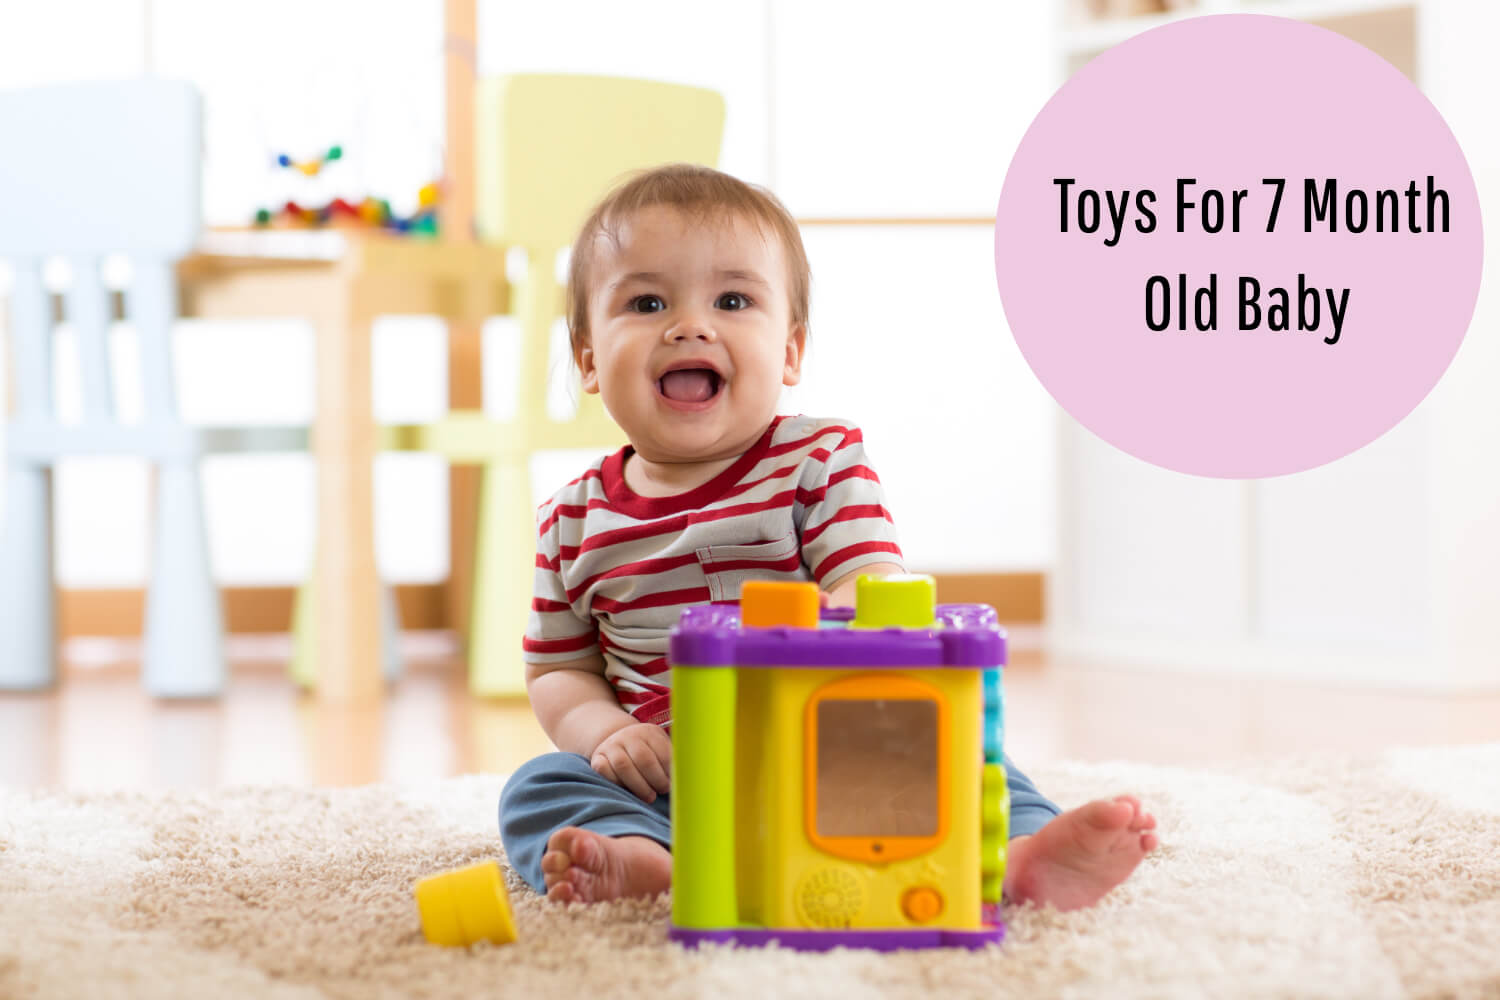 Toys For 7 Month Old Baby – Types, Benefits and What to Buy